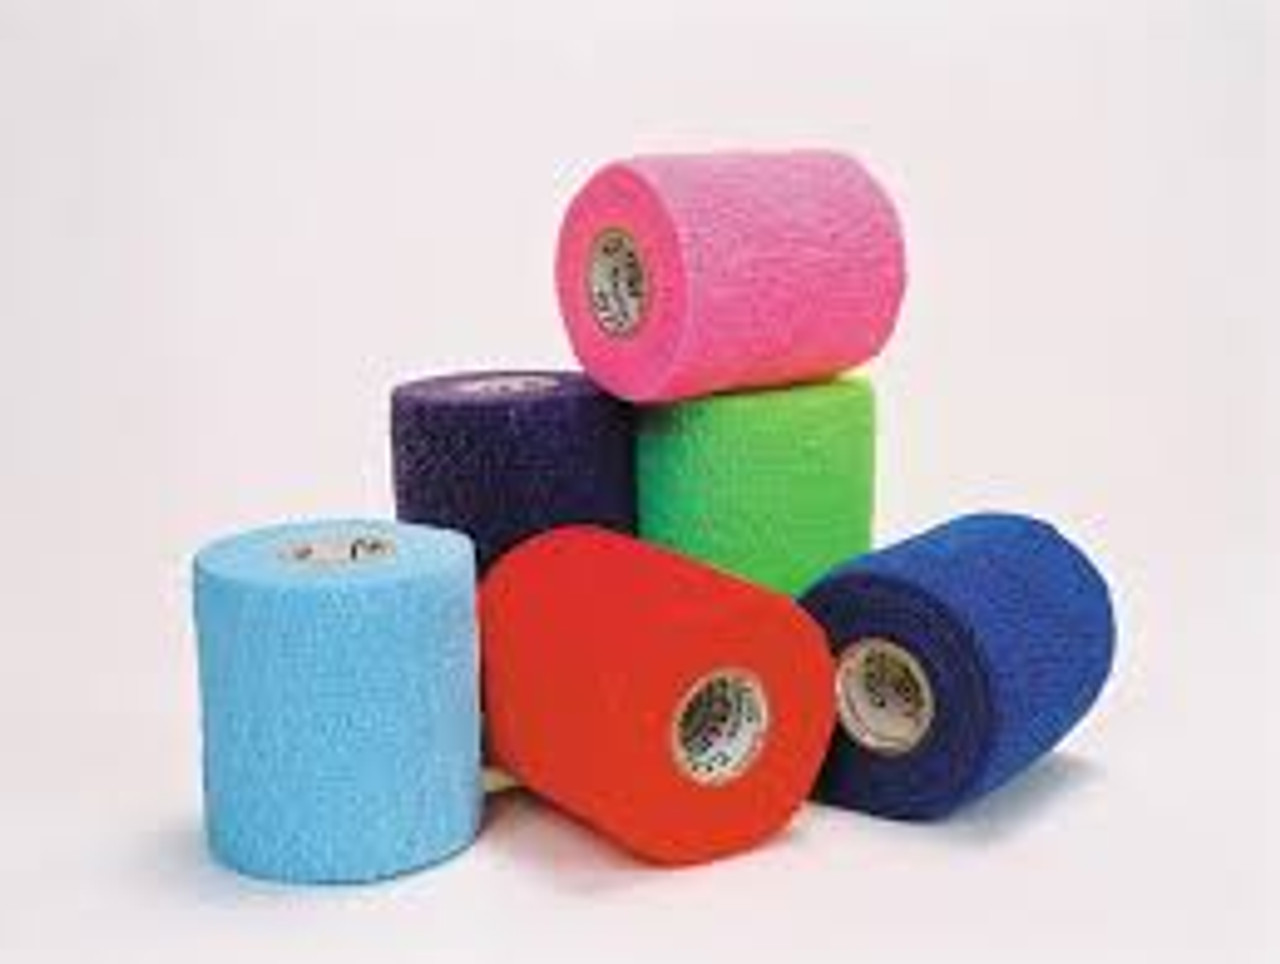 BSN-7210202 BX/18 CO-PLUS ELASTIC COHESIVE BANDAGE 10CM X 3.6M (STRETCHED), MIXED COLORS